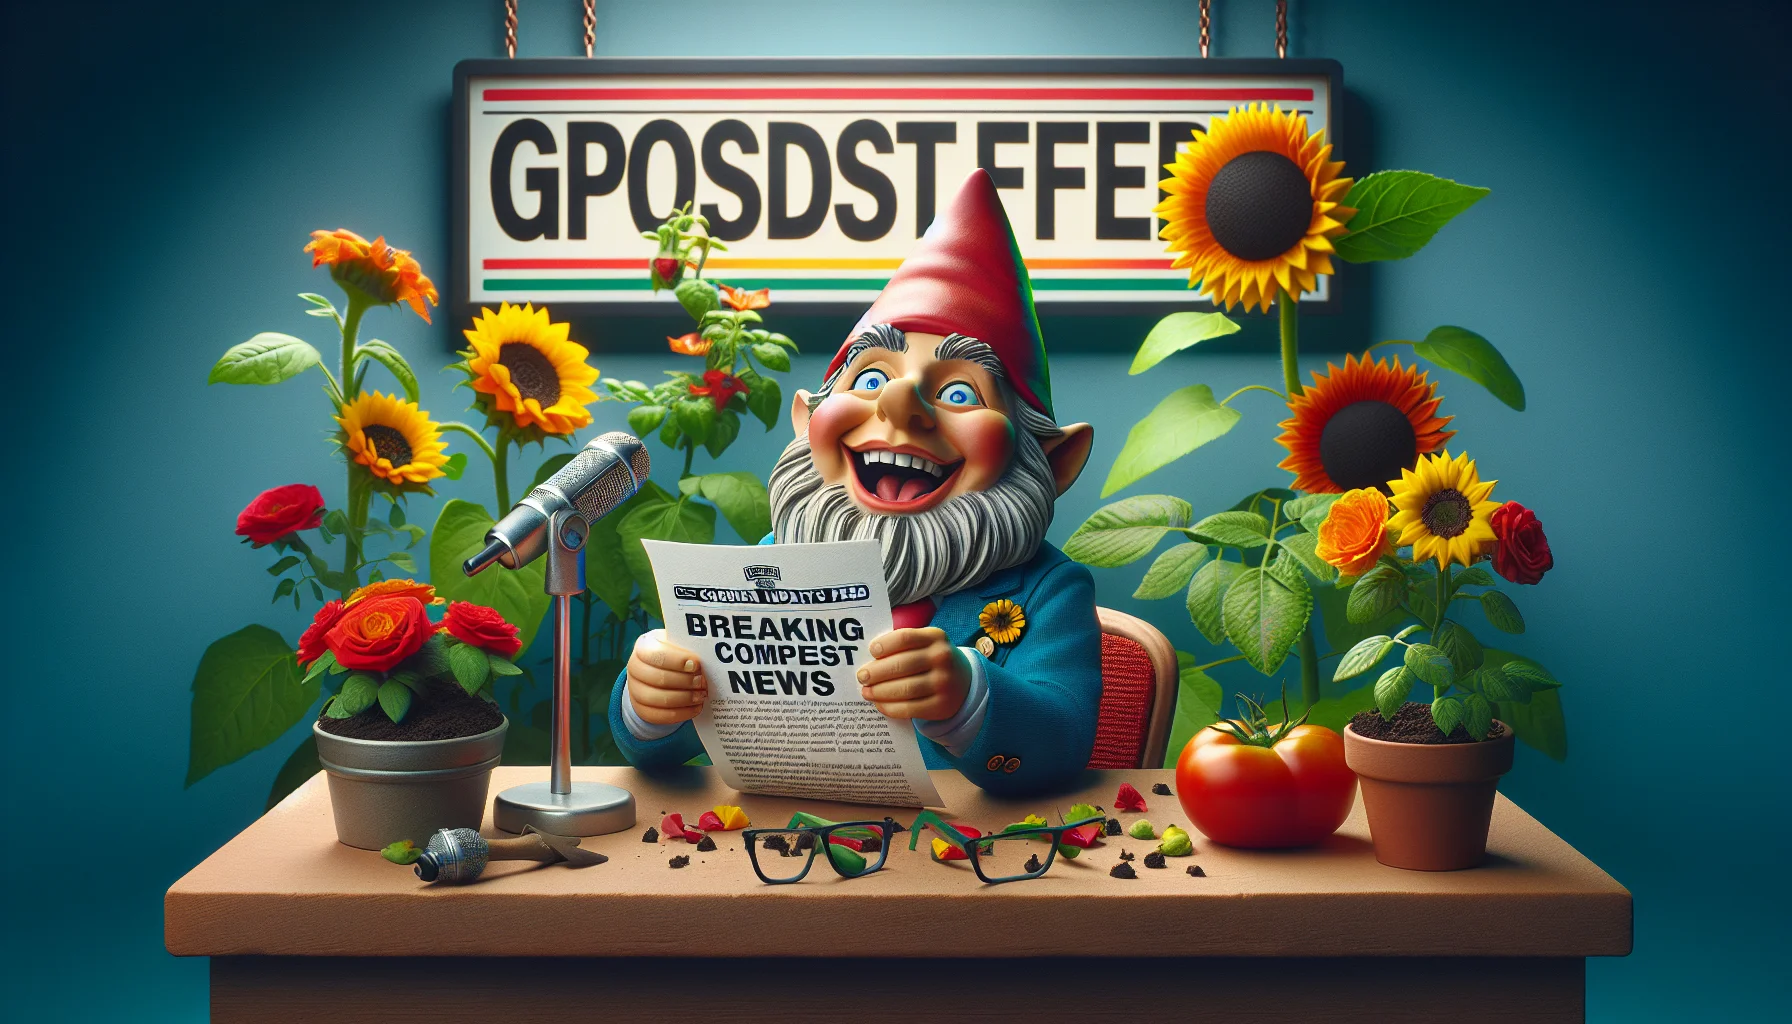 Create a humorous and realistic image that promotes the joys of gardening. Picture this: A garden gnome with exuberant facial expressions is sitting behind a news desk, microphone in hand. He is surrounded by vibrant sunflowers, roses, and tomatoes plants that are popping their heads into the frame, appearing as 'guests' on the show. The backdrop features a large sign that says 'Garden Updates Feed'. The gnome is going over a sheet of paper labeled 'Breaking Compost News', attempting to decipher it with a comical pair of oversized reading glasses. This playful scene encourages viewers to find the fun in gardening.